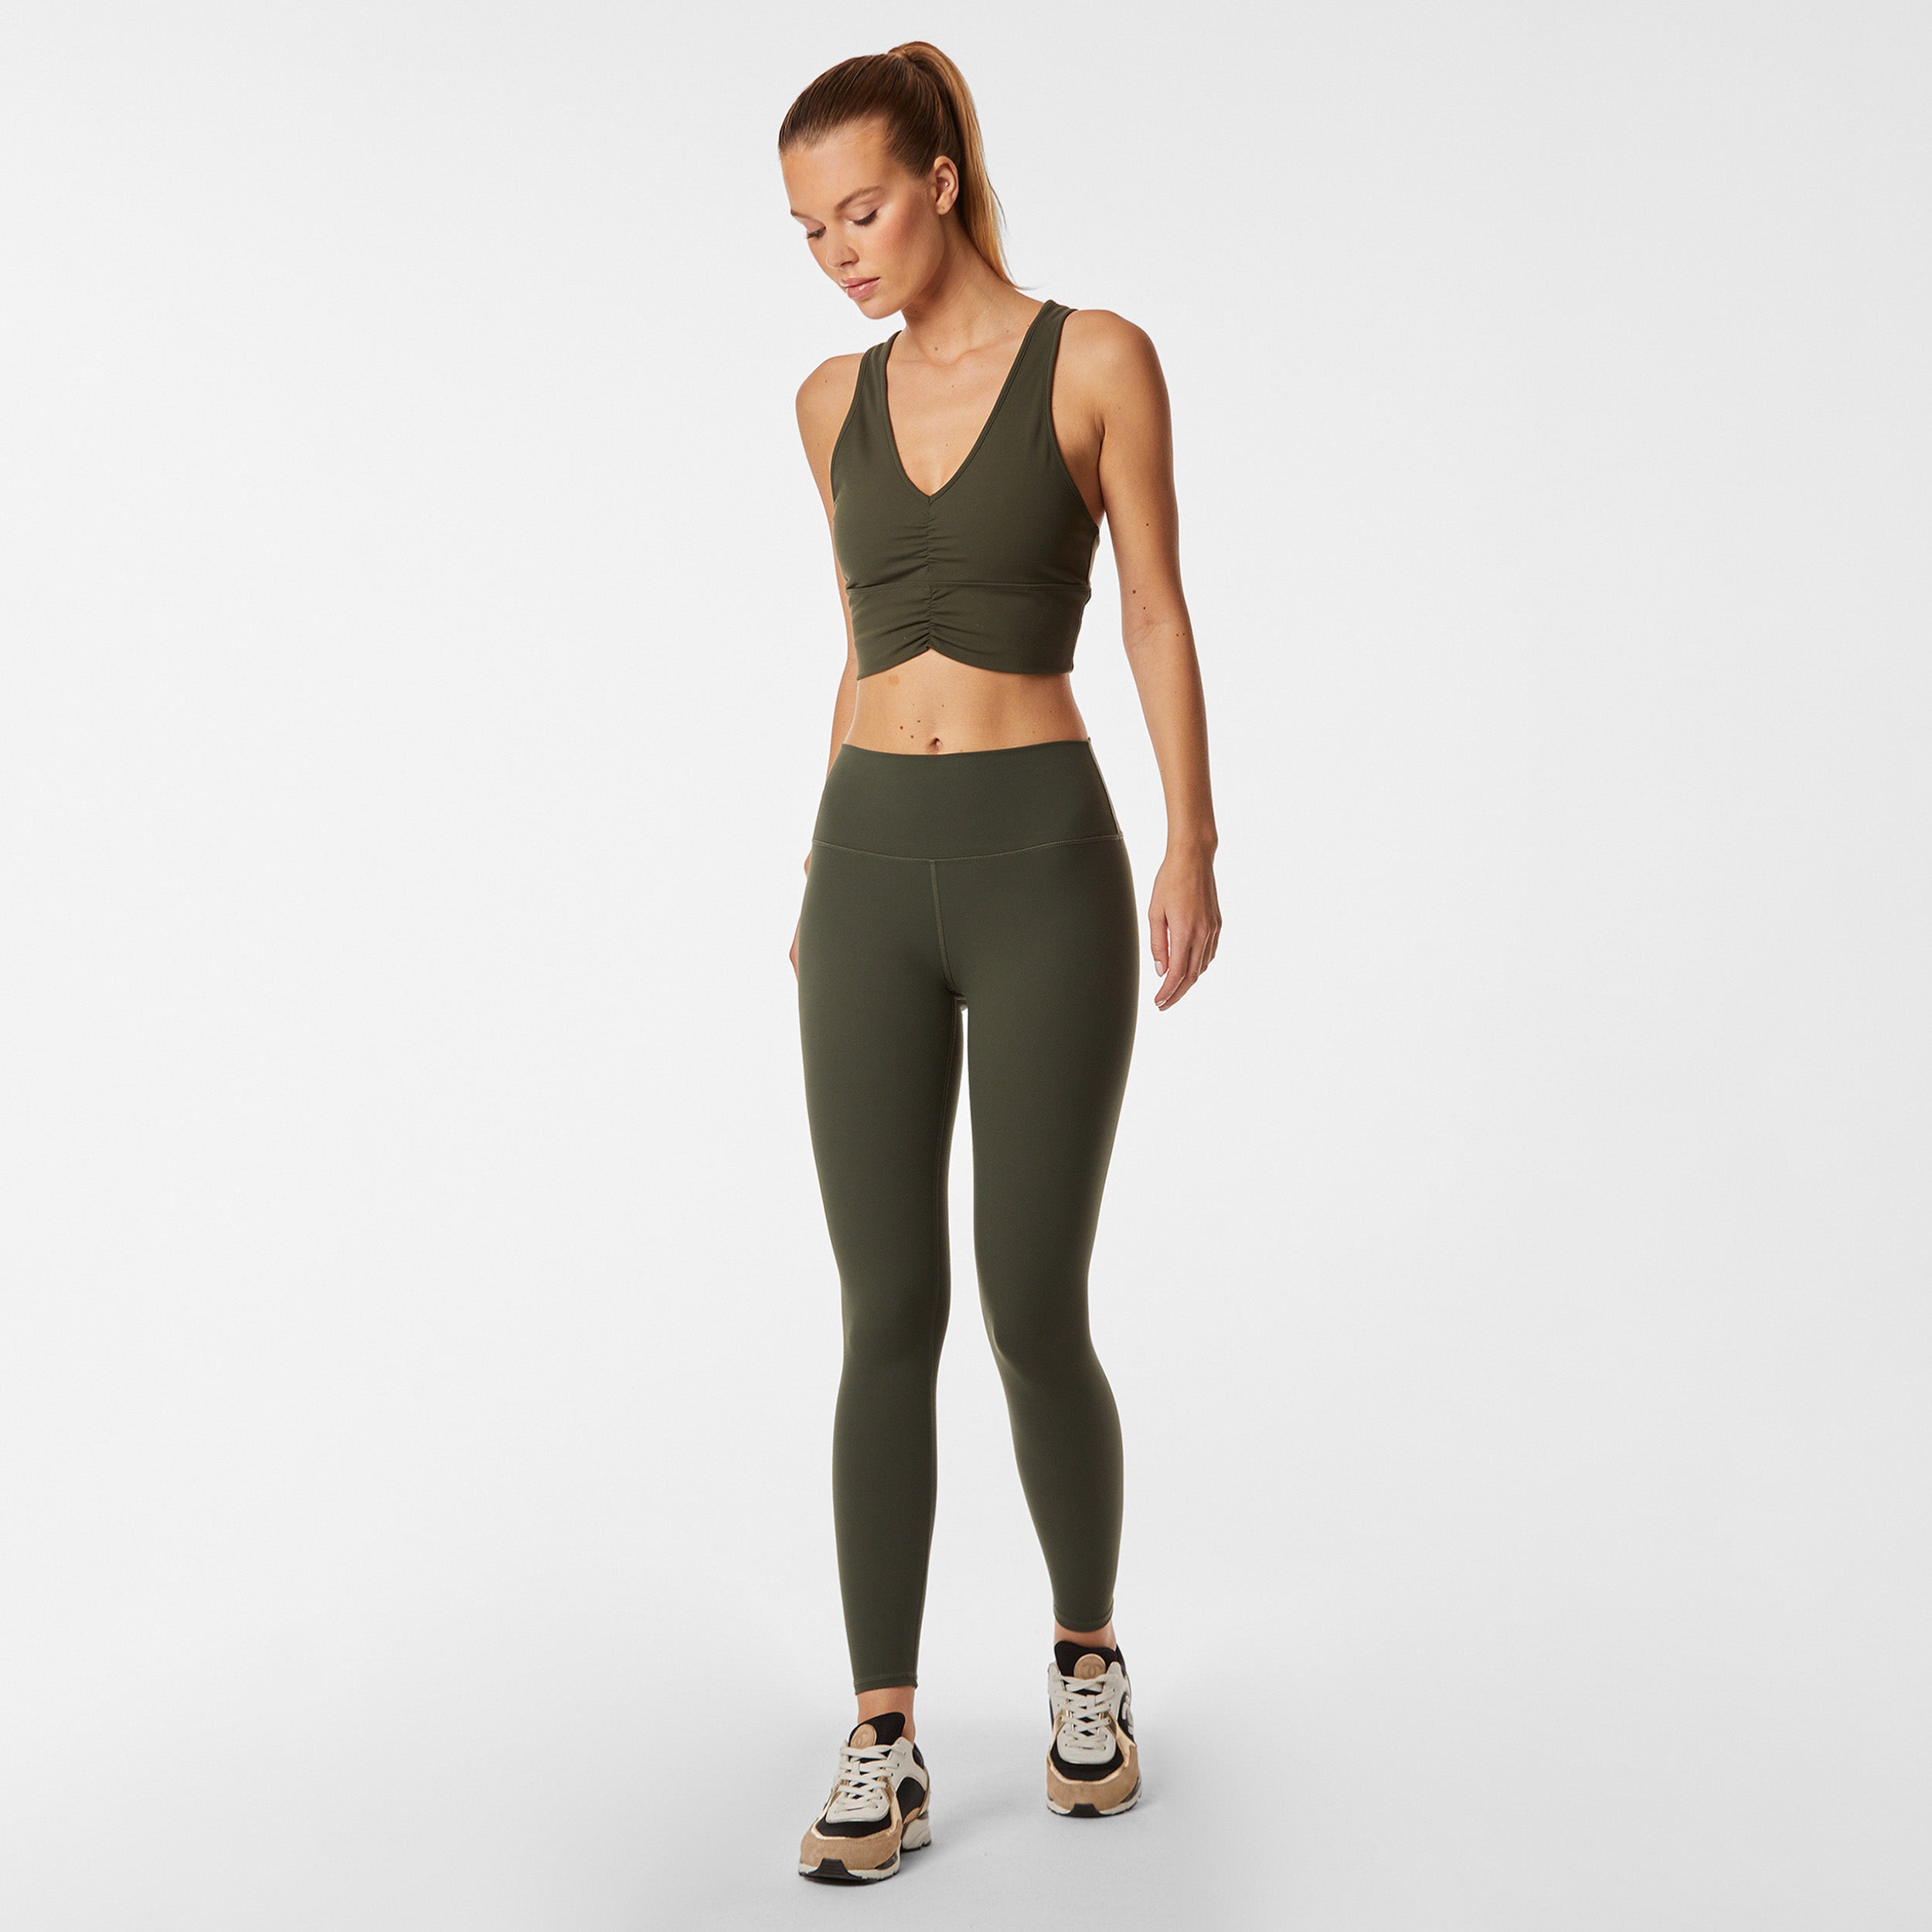 Full view of woman wearing sculpting and flattering green legging